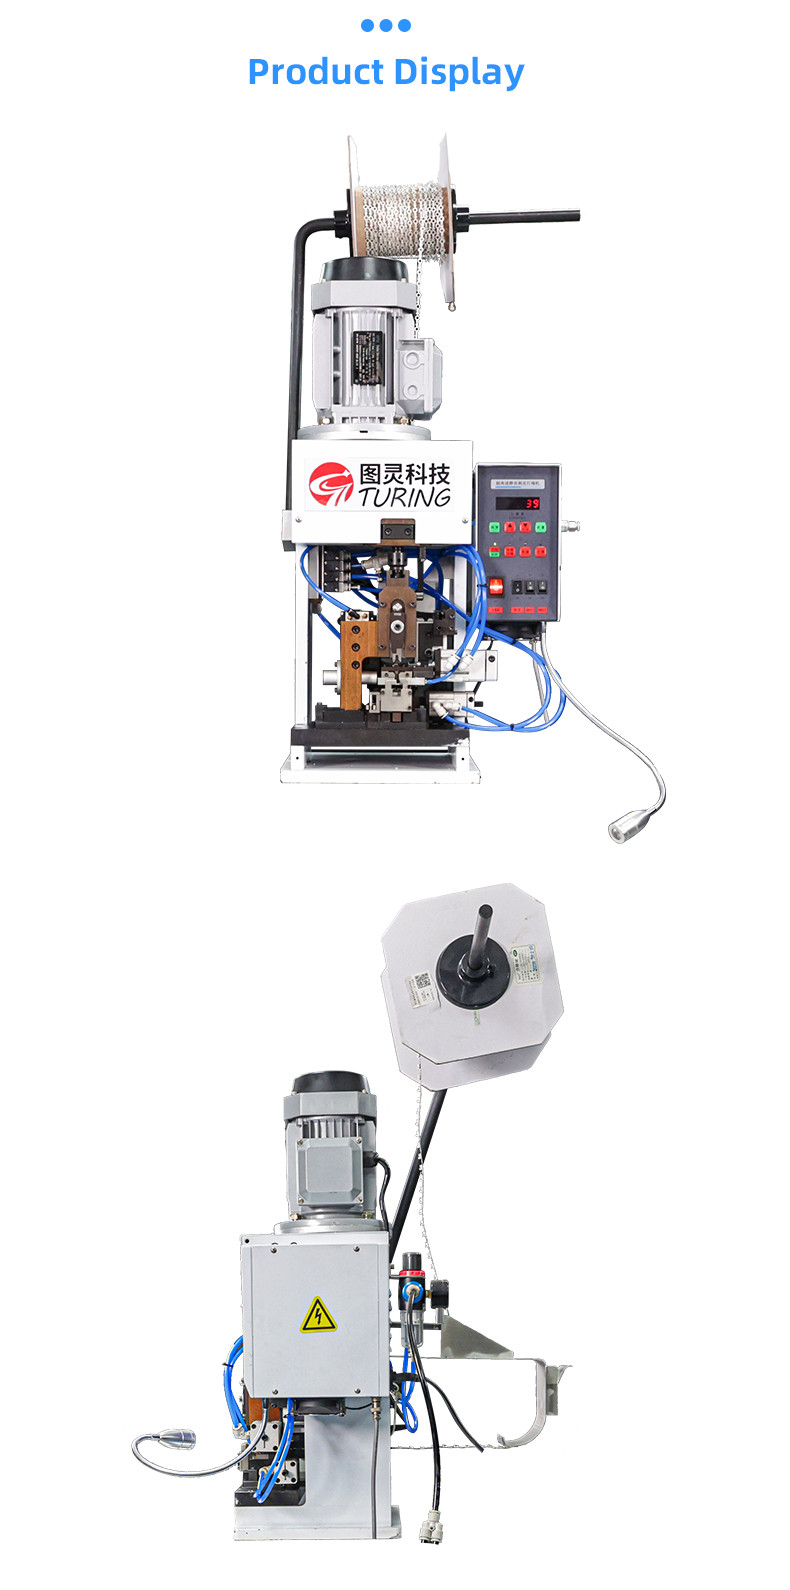 TR-BD3000 semi-automatic straight stripping and Crimping terminal machine